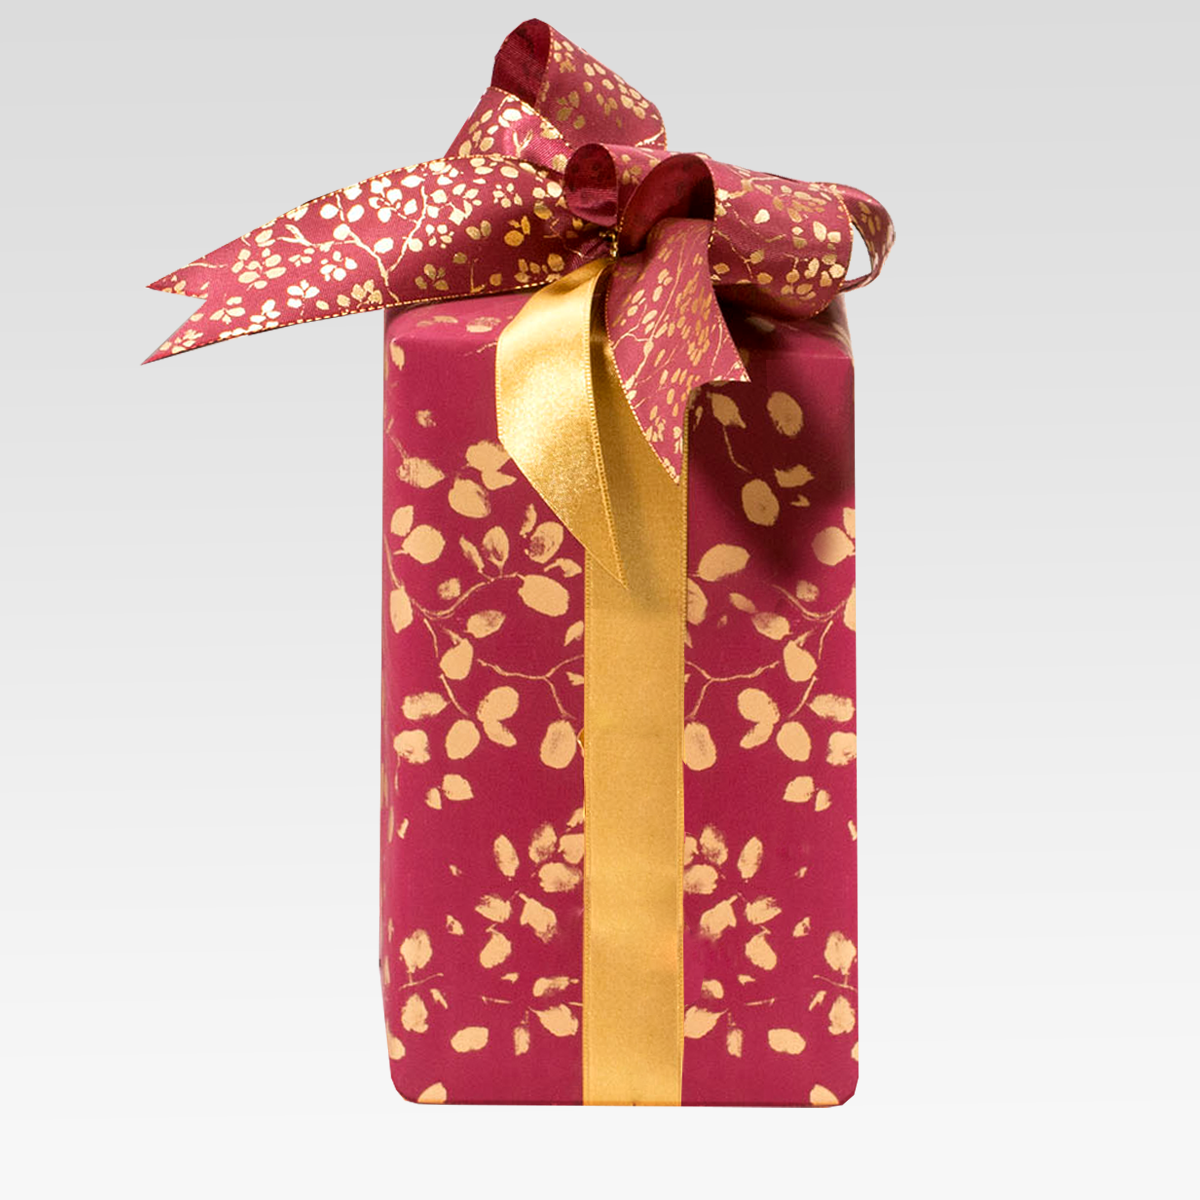 Gift Wrap Sheets - Forest Art Gold on Dark Red (Pack of 25 sheets)